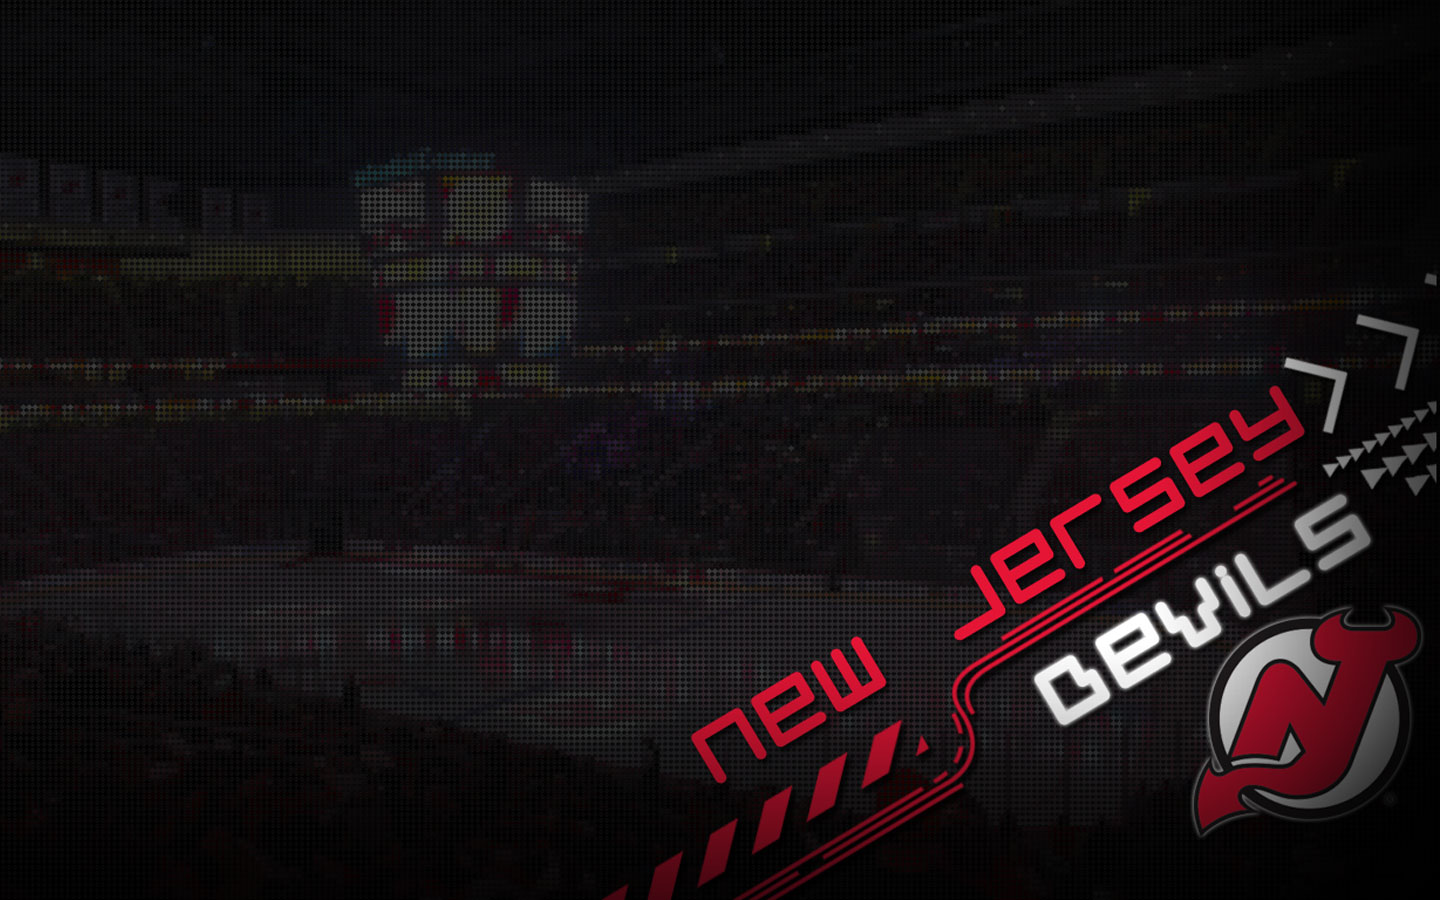 New Jersey Devils Or Even Videos Related To